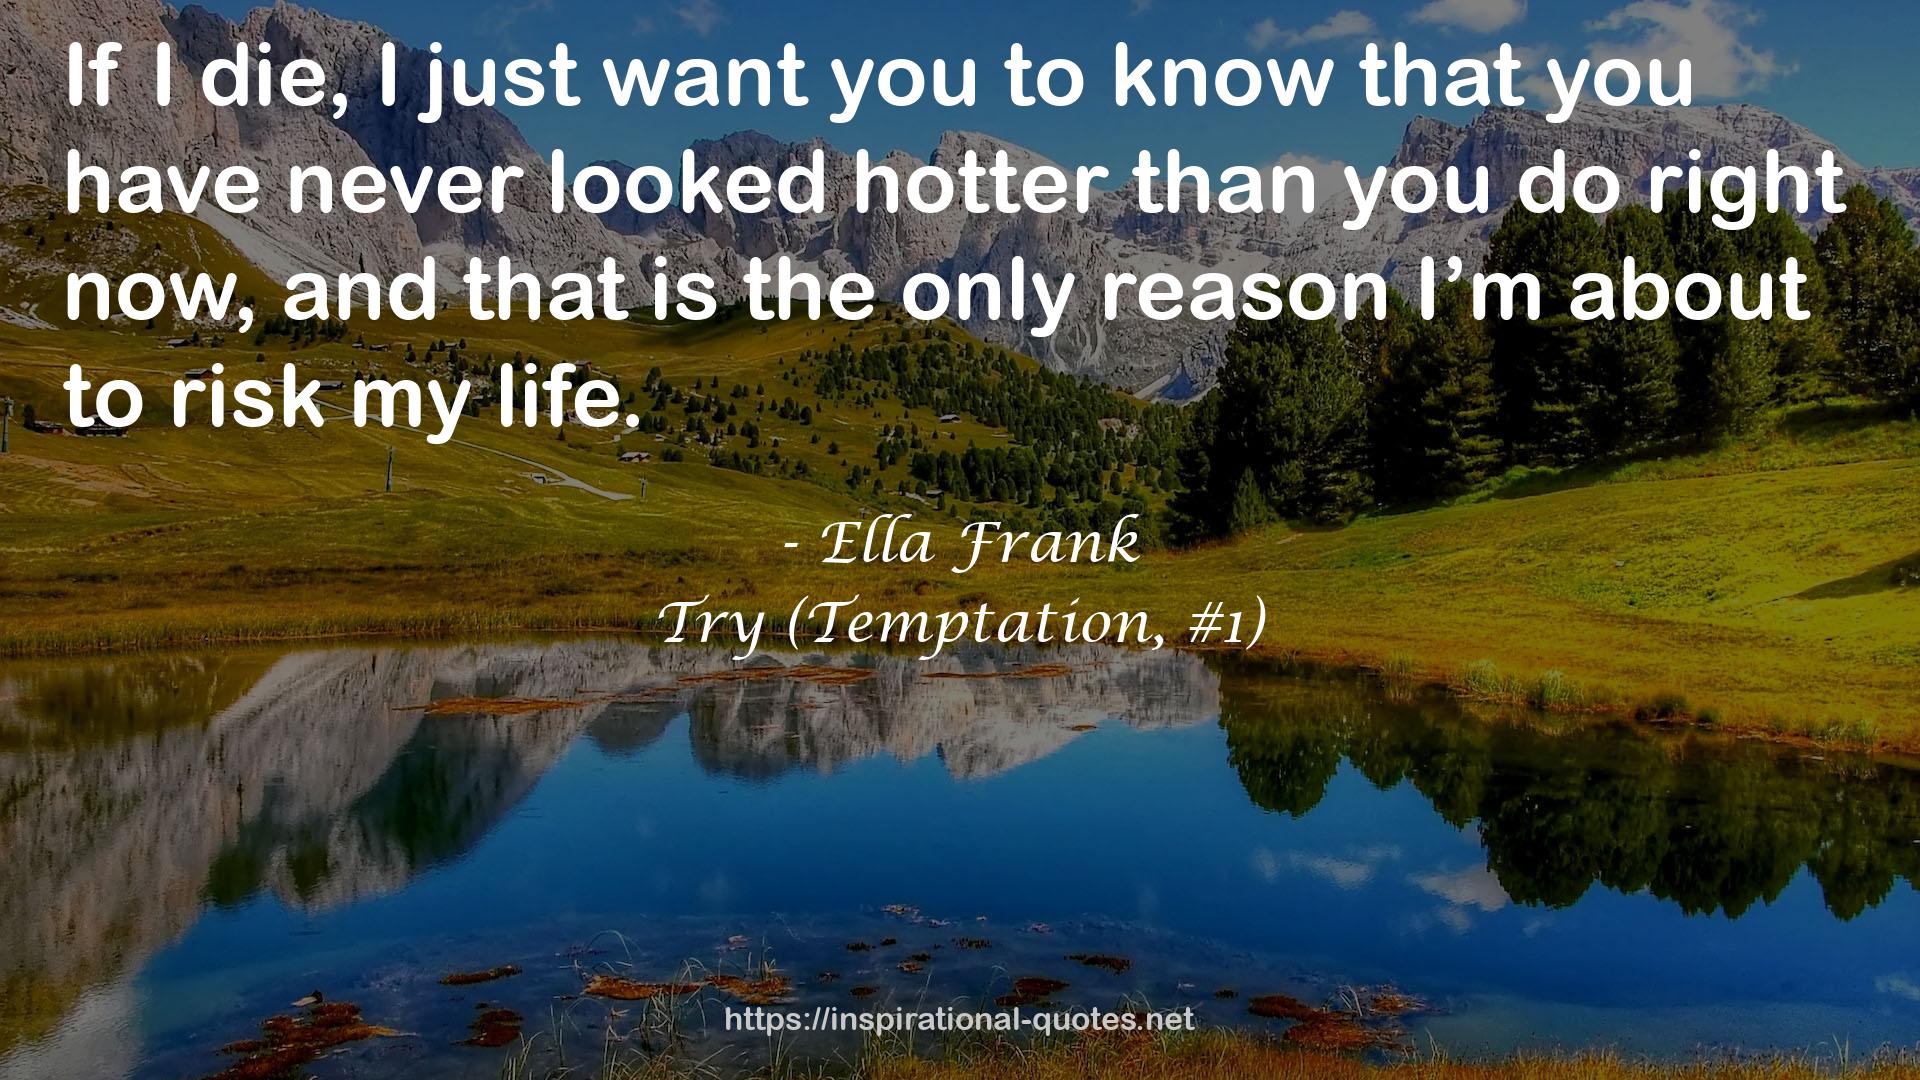 Try (Temptation, #1) QUOTES